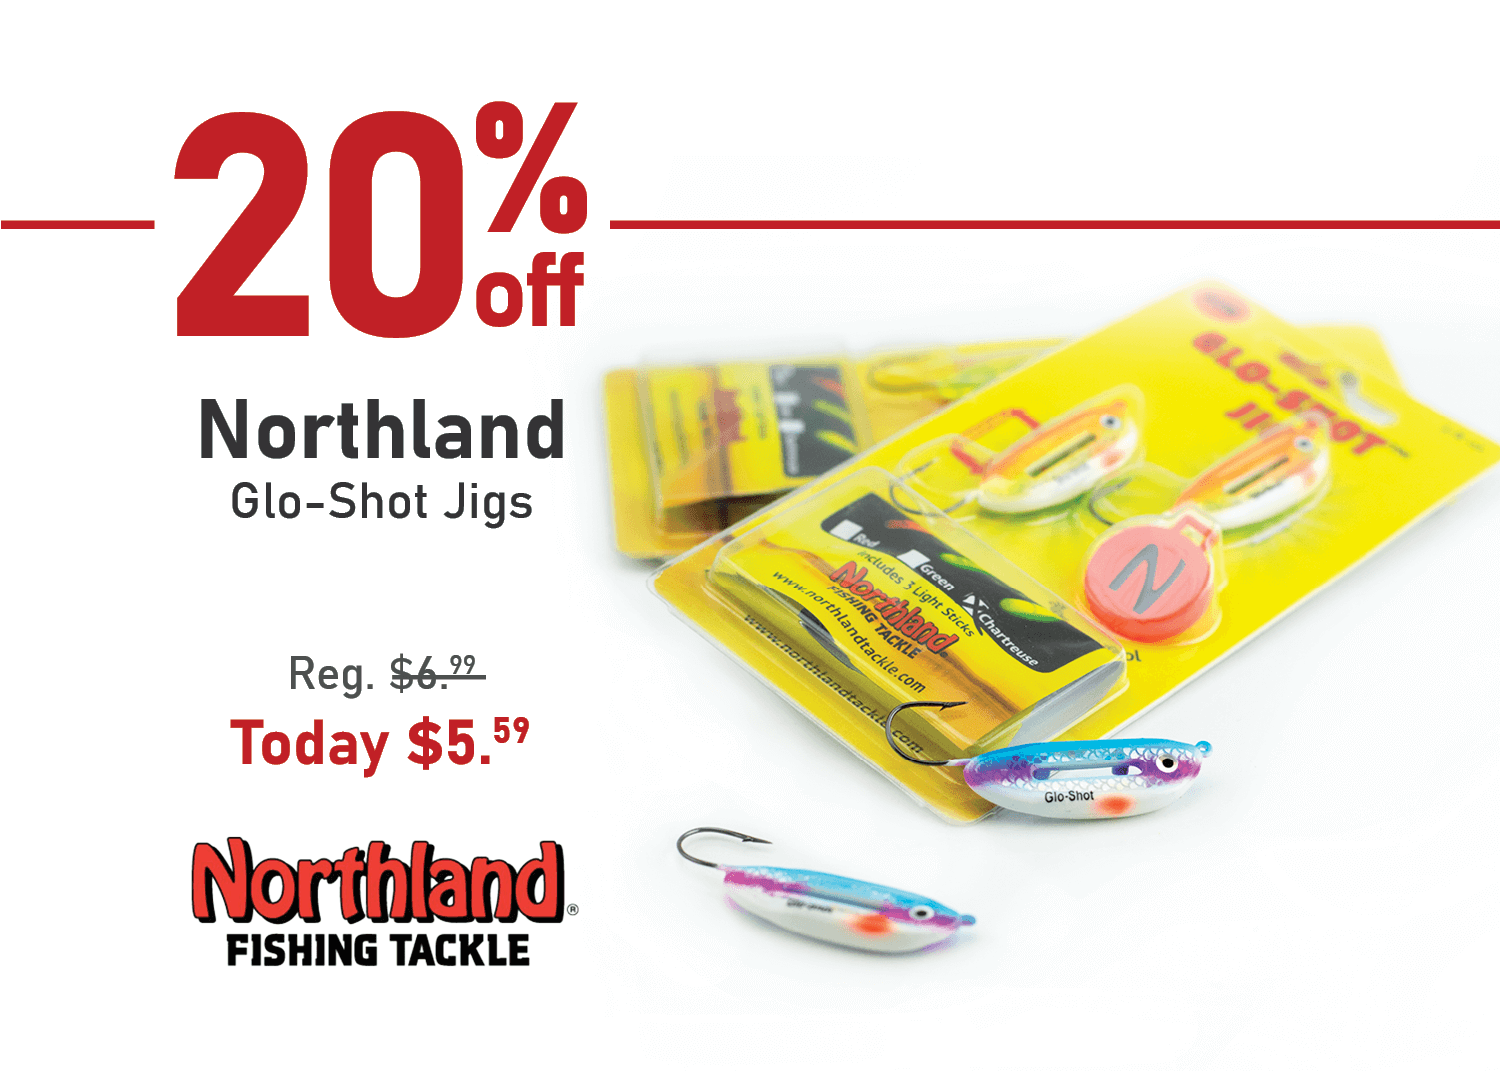 Save 20% on the Northland Glo-Shot Jigs